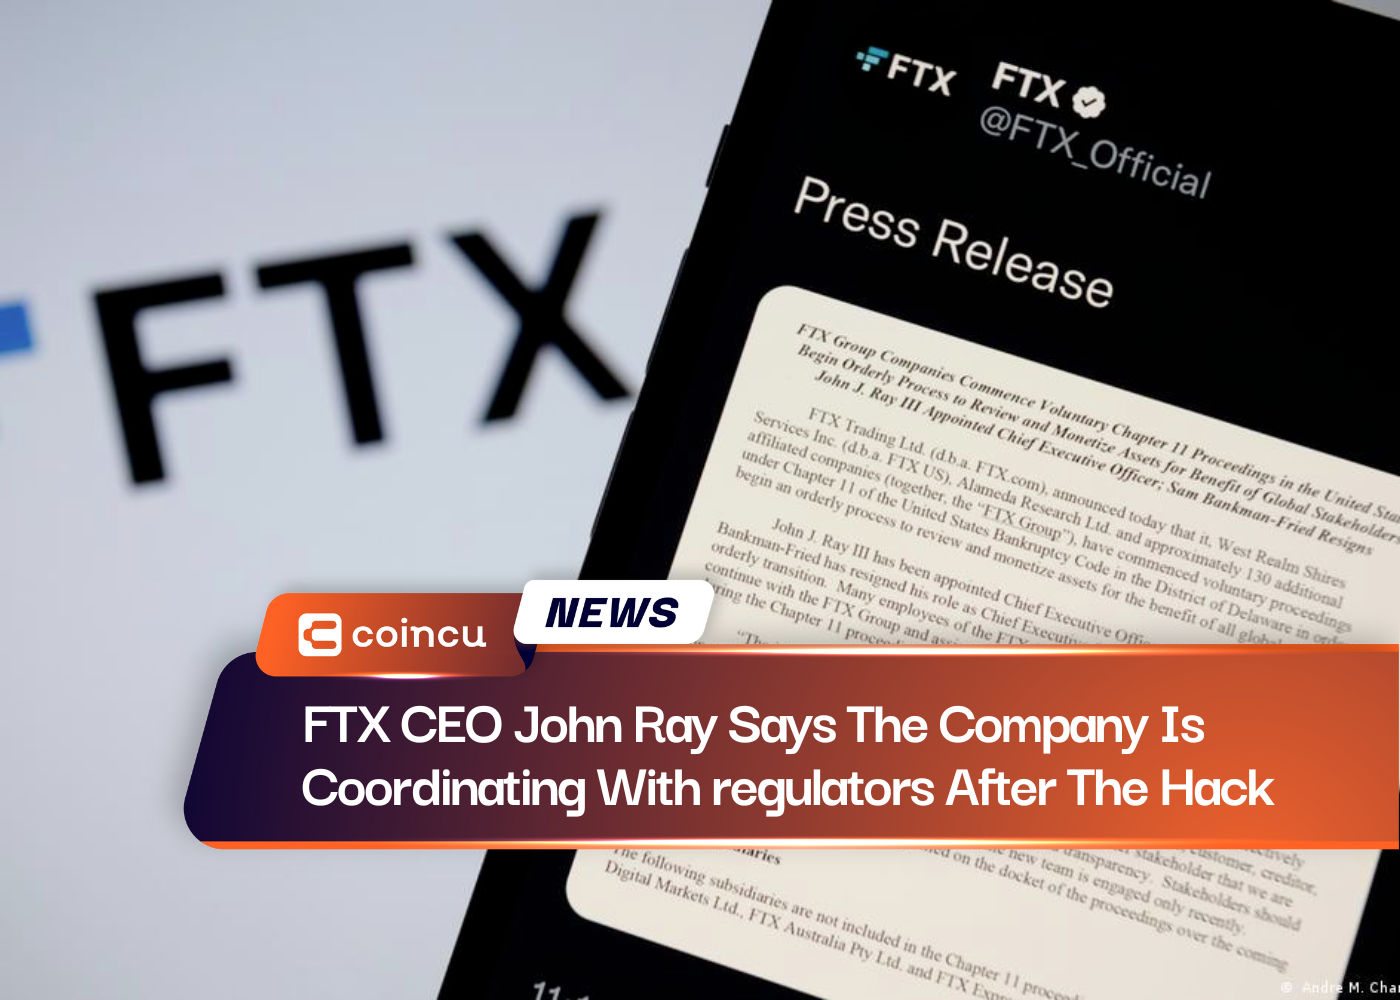 FTX CEO John Ray Says The Company Is Coordinating With regulators After The Hack